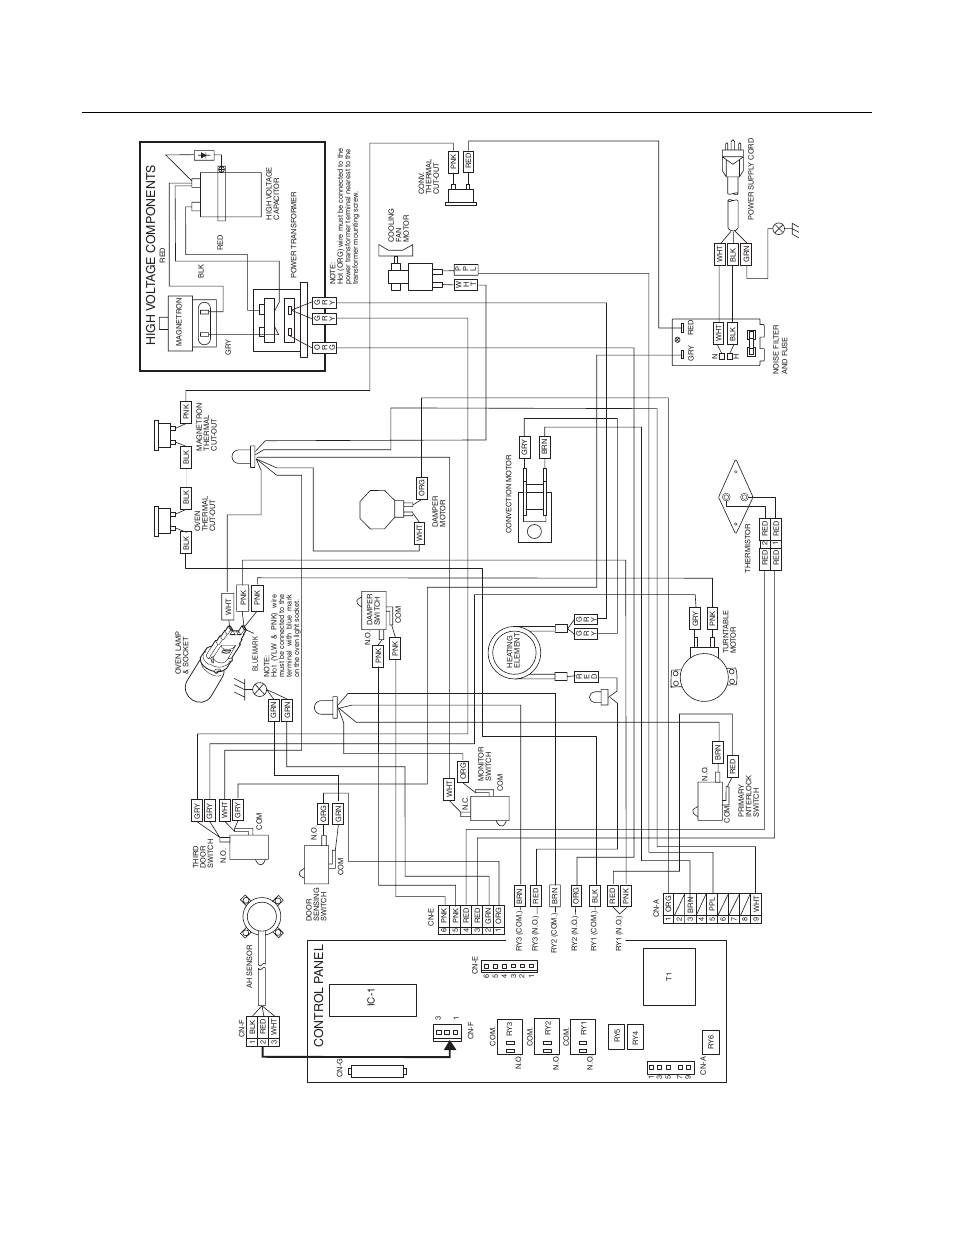 Contr ol p anel, High v o lt a ge components | Electrolux E30MO65GSSA User Manual | Page 8 / 8